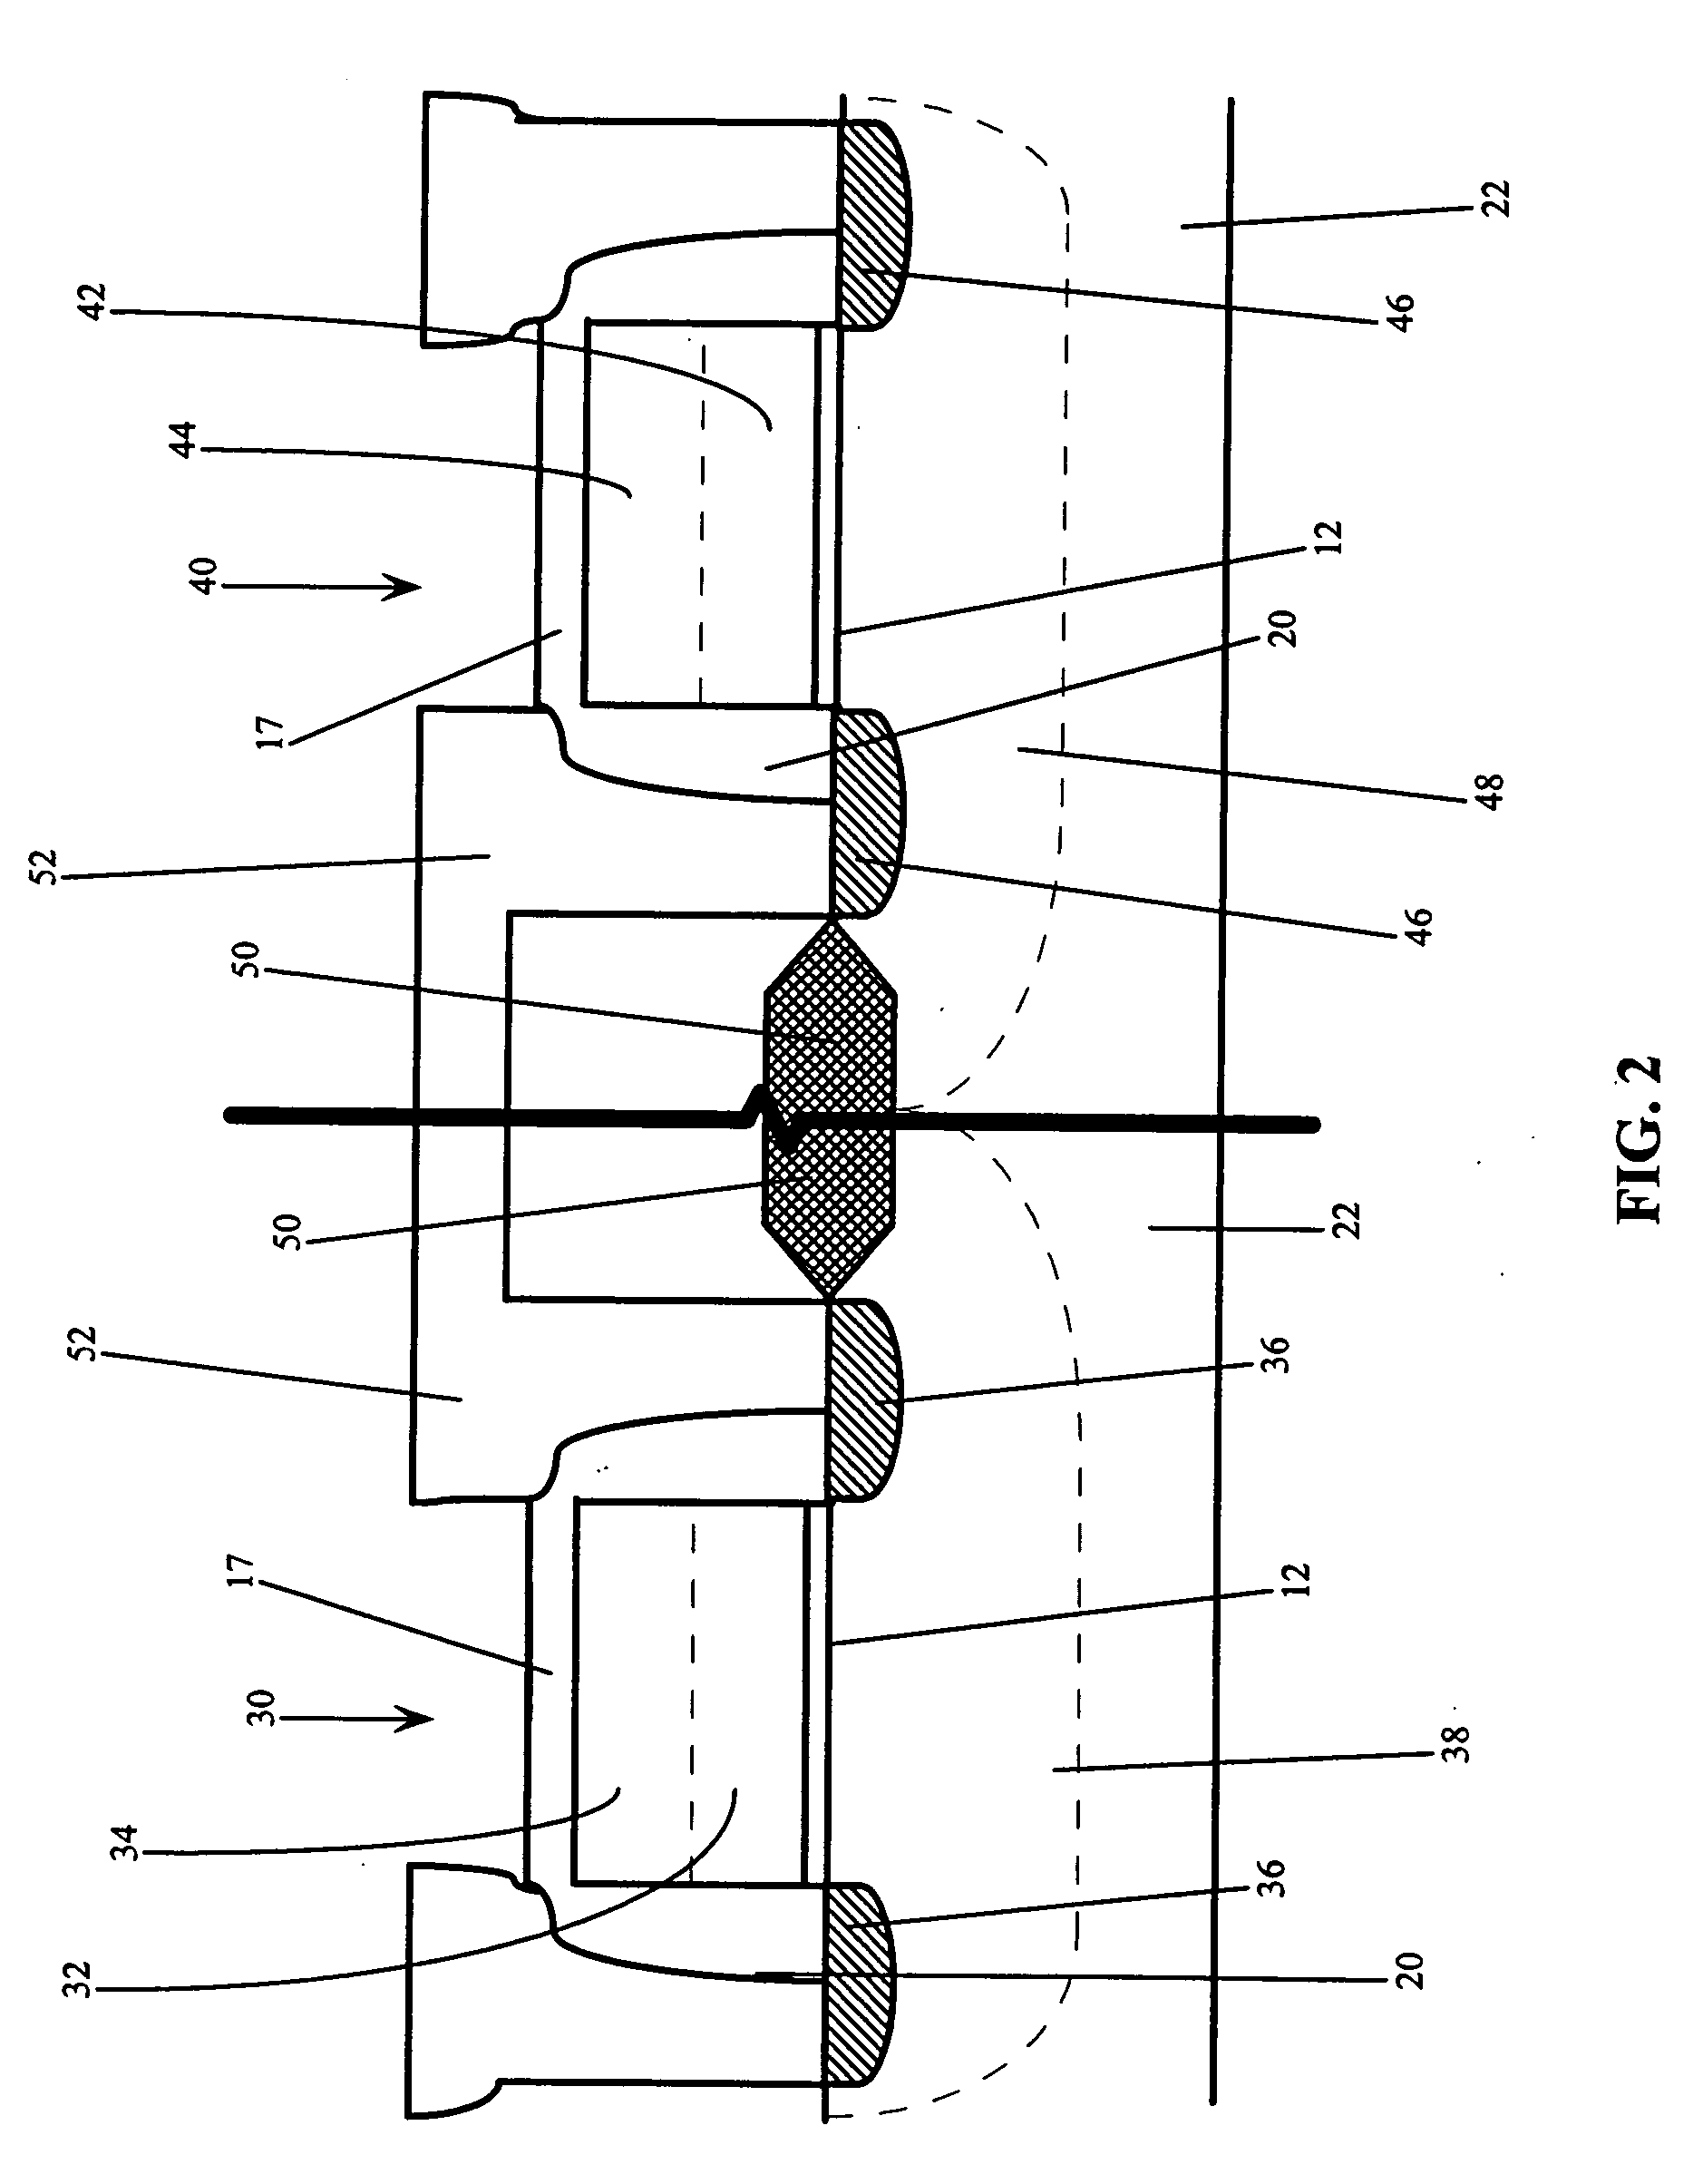 Use of gate electrode workfunction to improve DRAM refresh